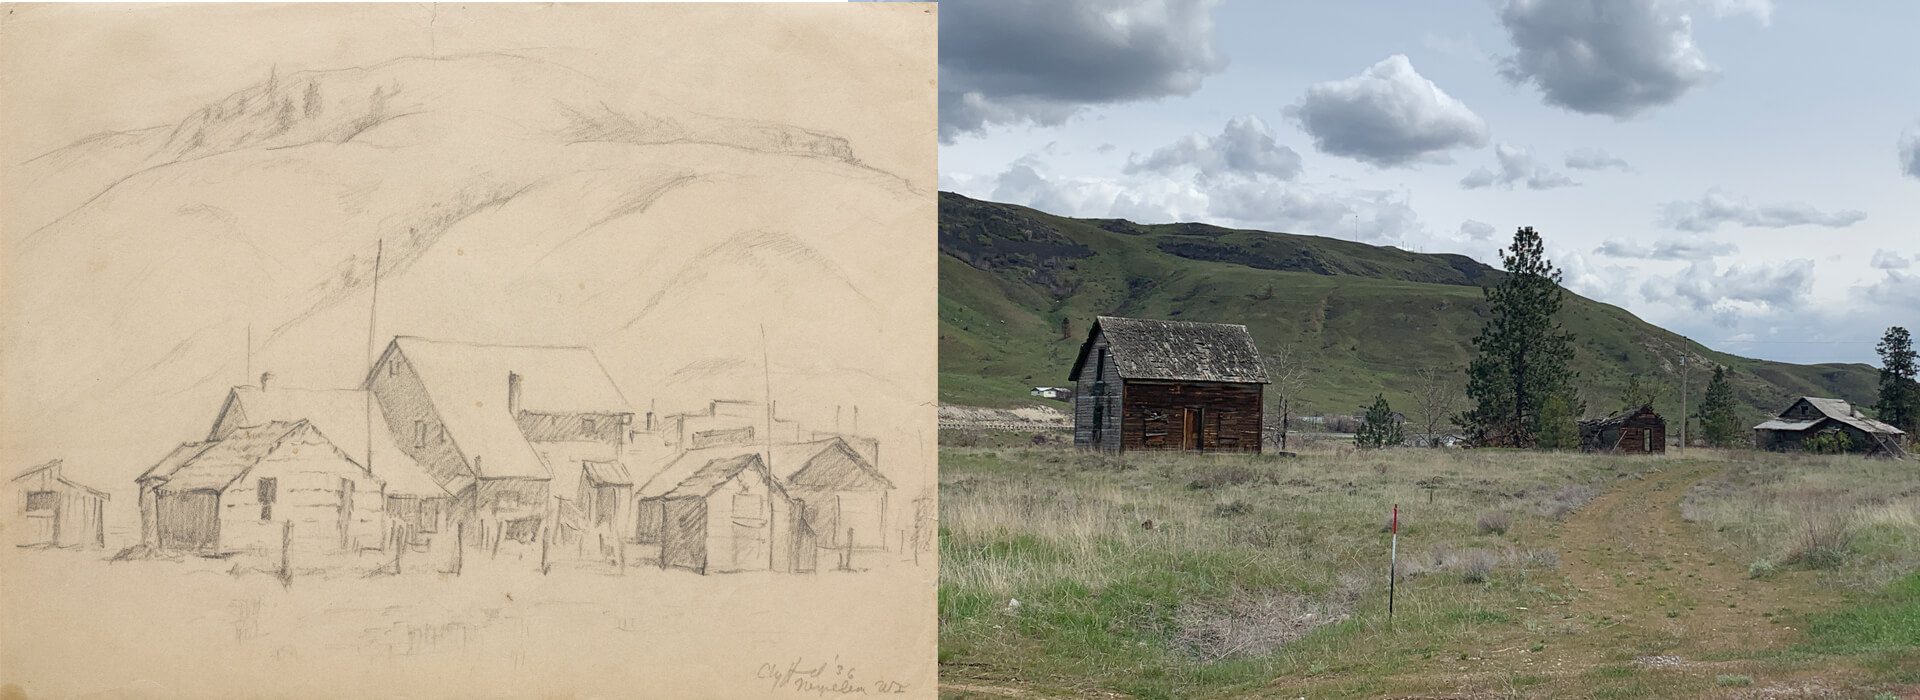 Side by side images of a graphite sketch on paper of houses in front of a hillside and a color photo of the same scene